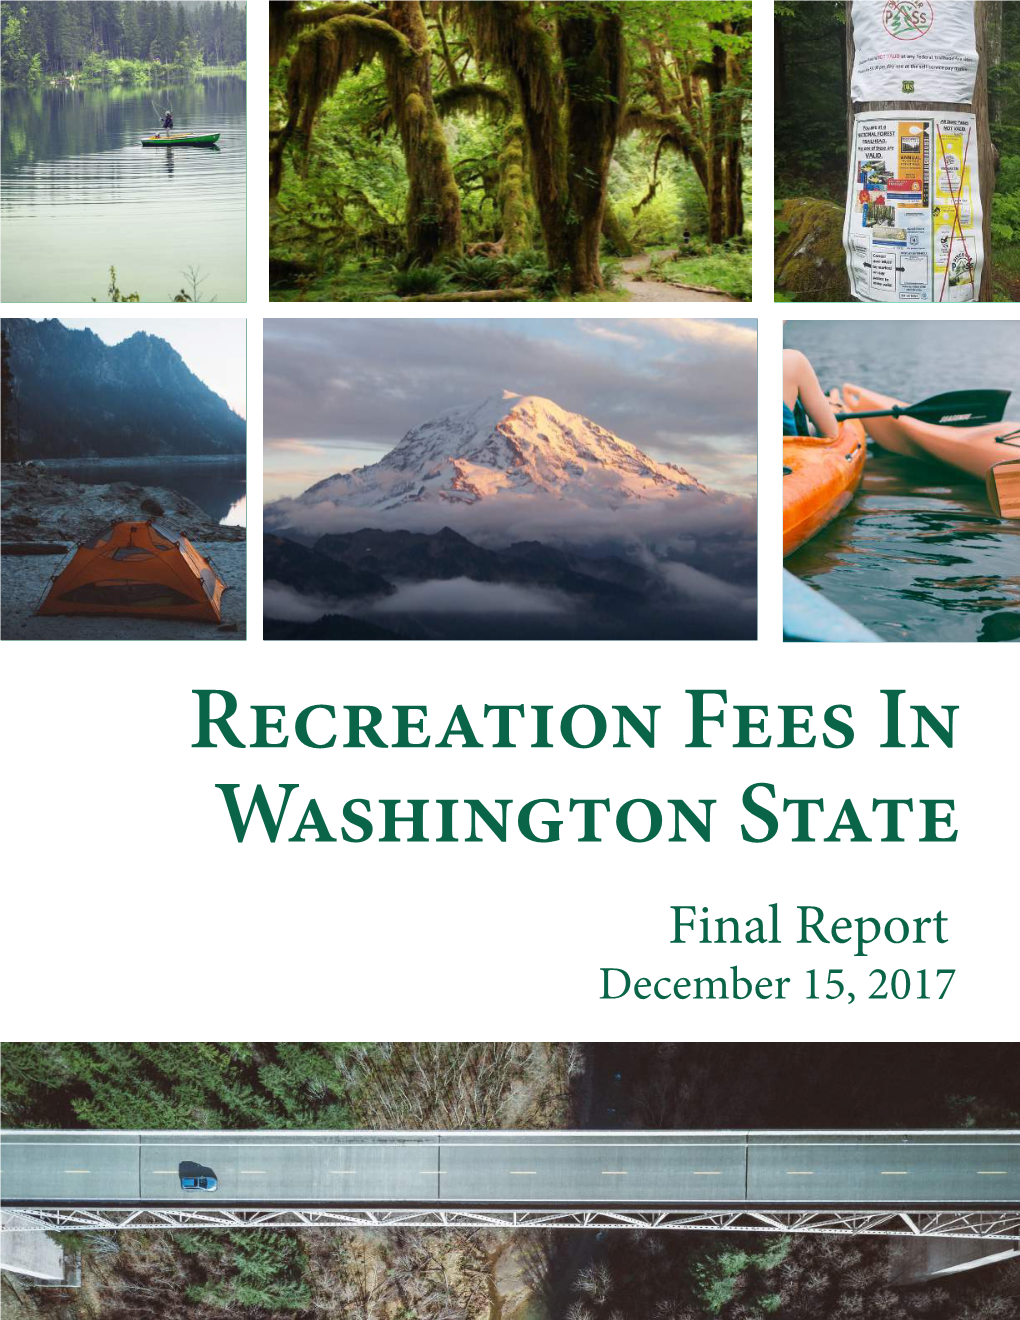 Recreation Fees in Washington State Final Report December 15, 2017 the William D